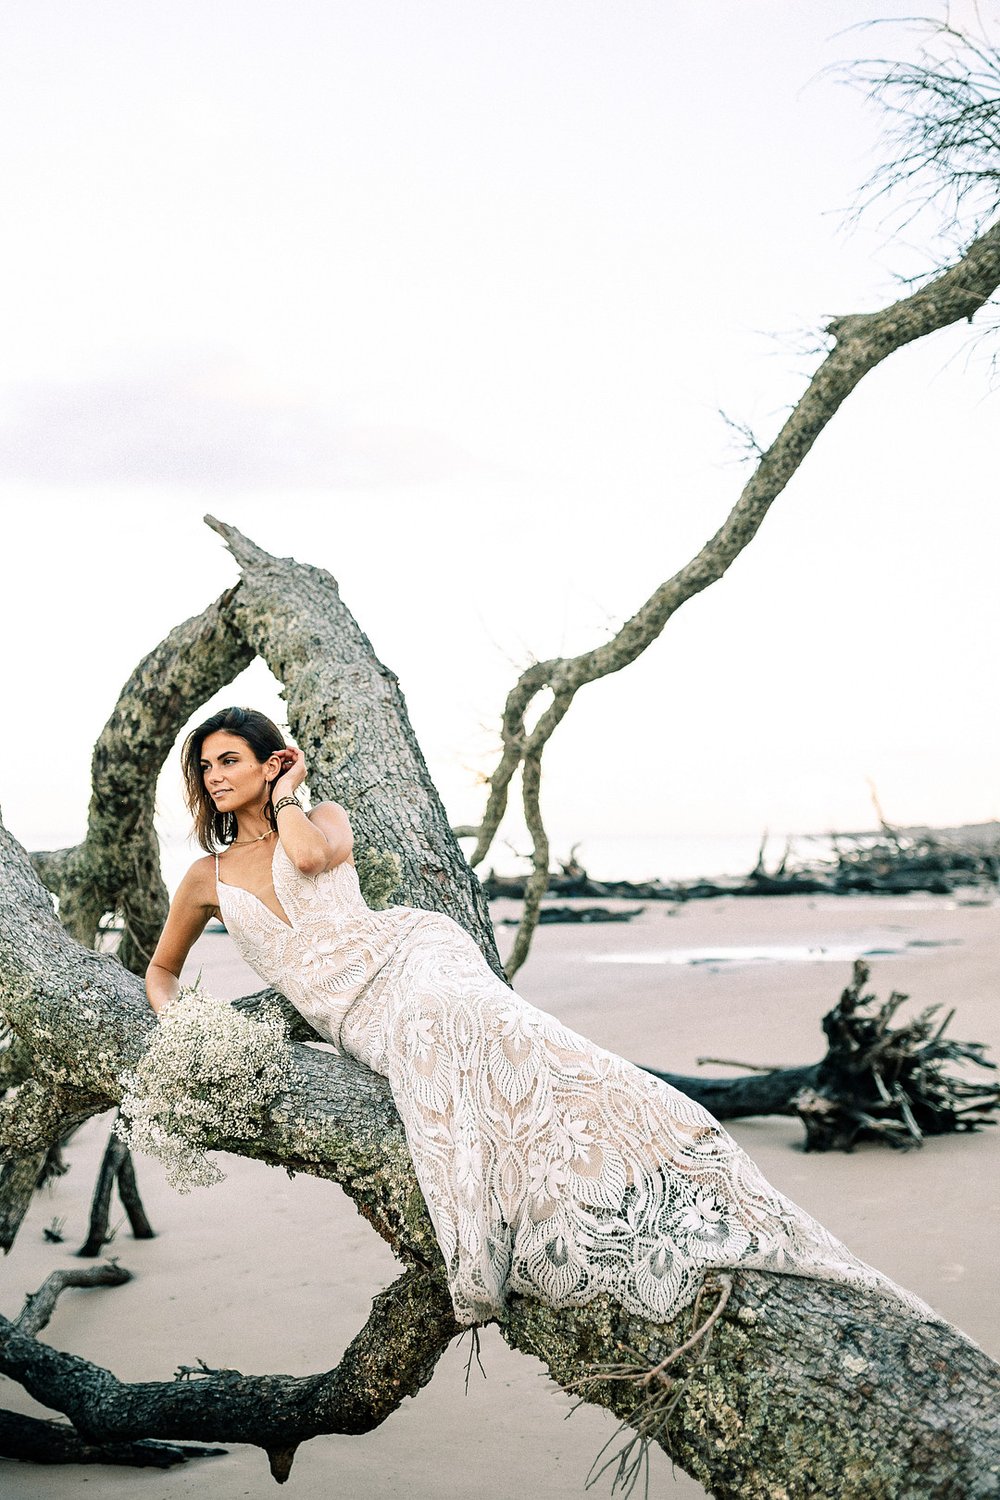 A beachy bridal moment_Carly Terry Photography_AW BRIDAL-0978_low.jpg